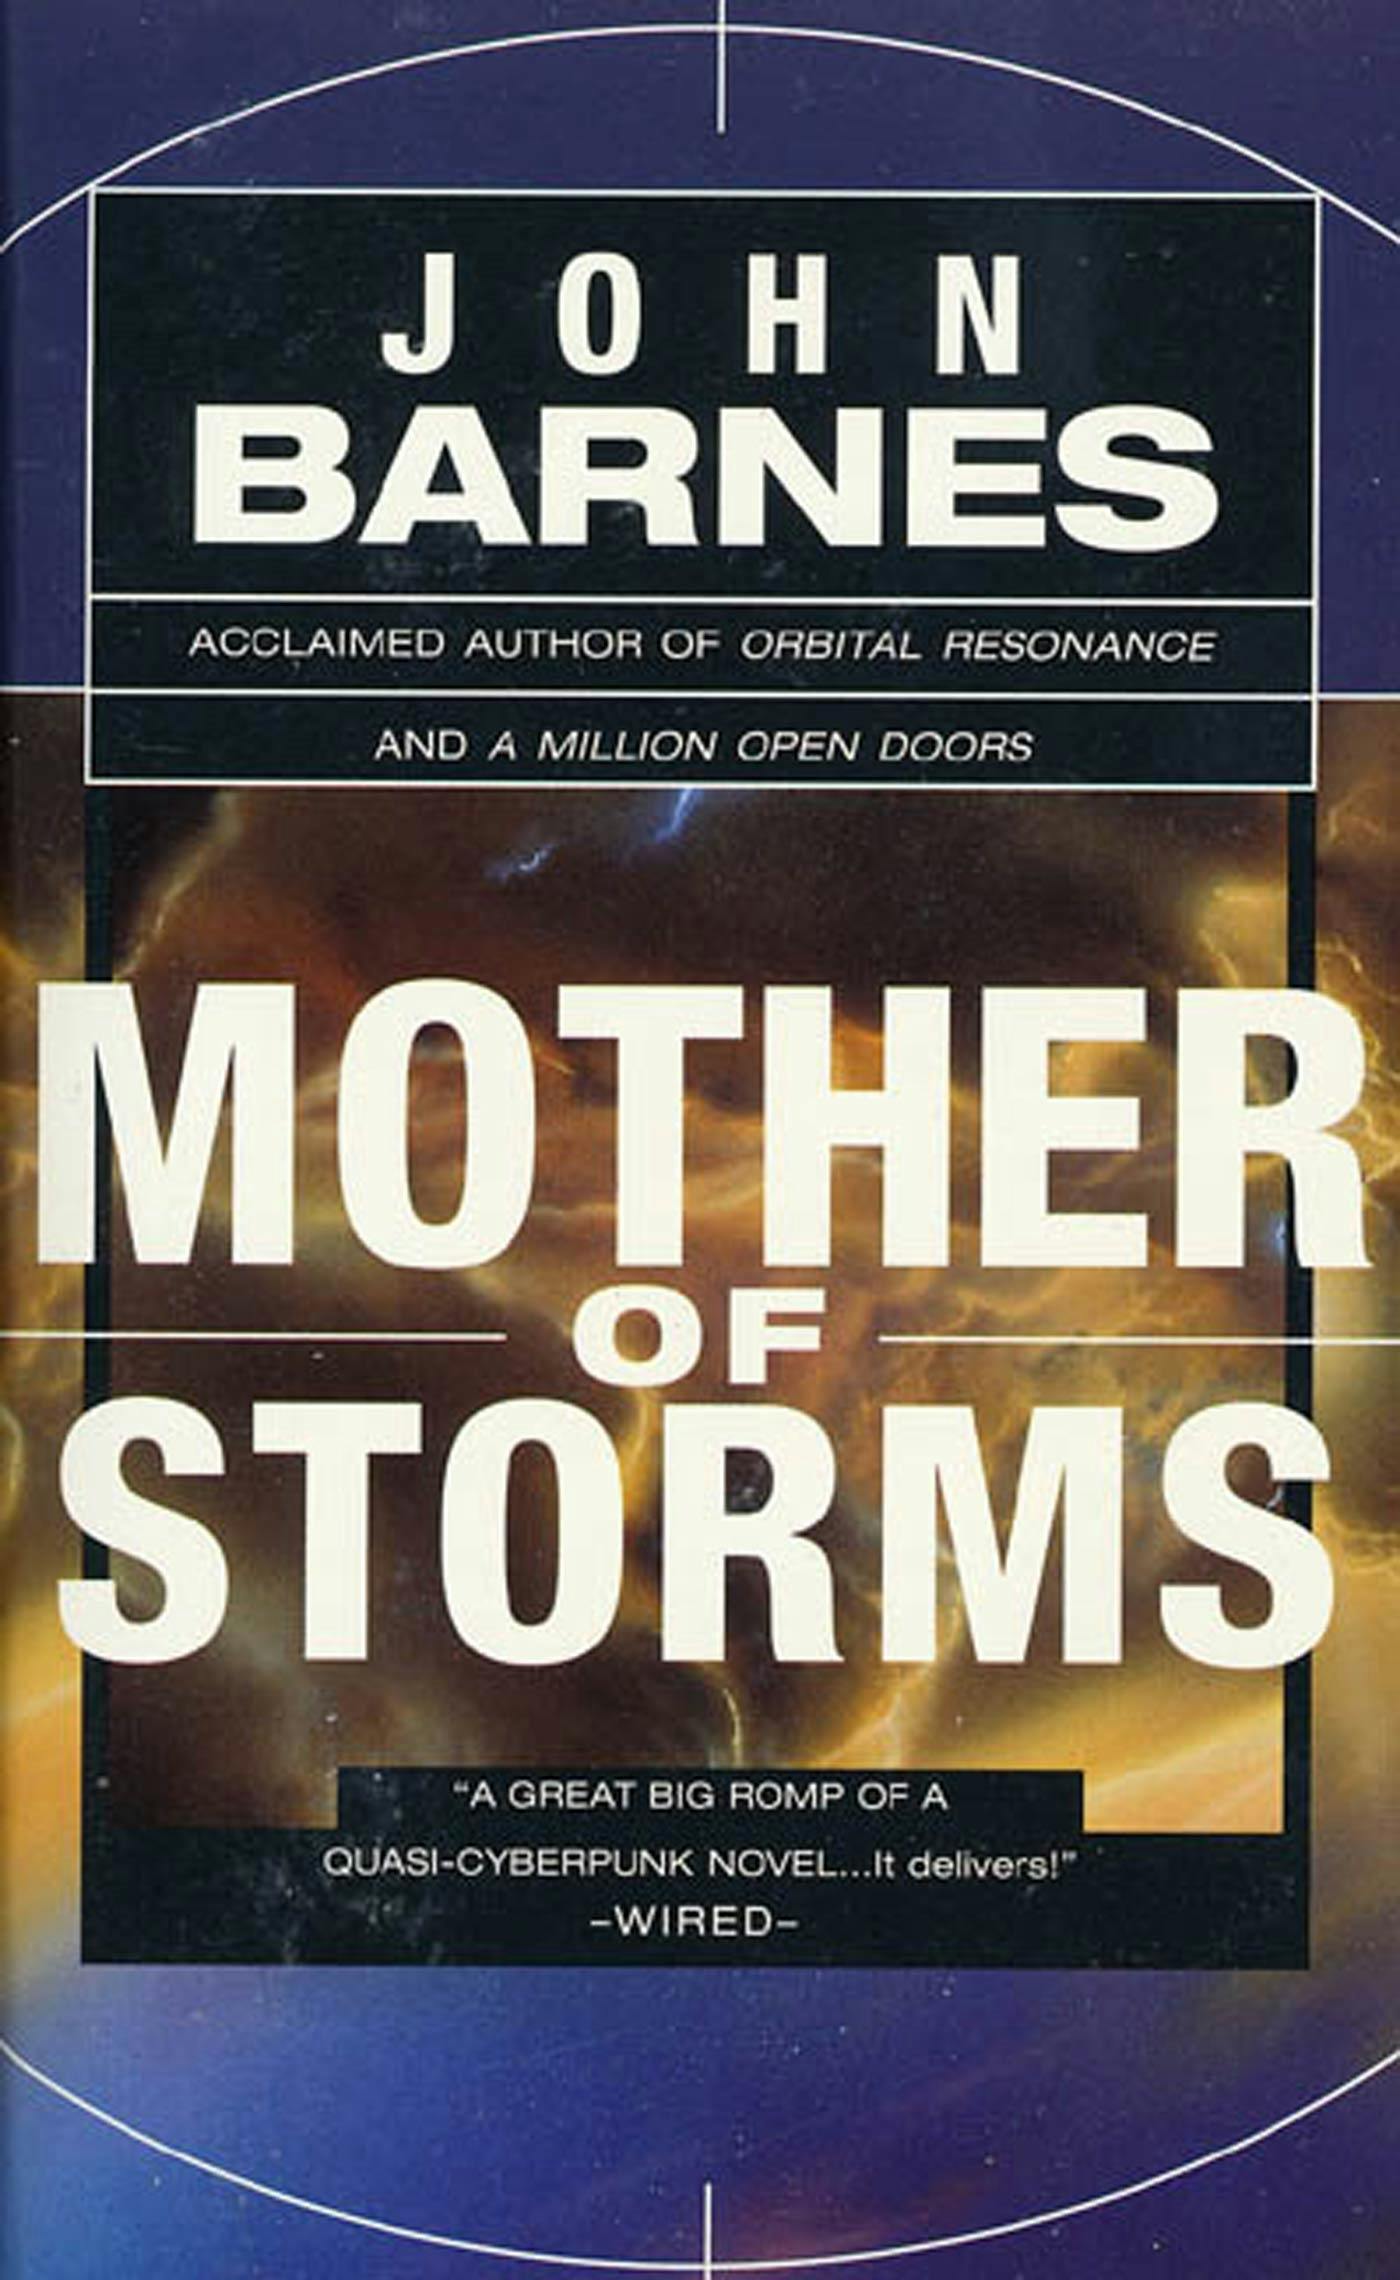 Cover for the book titled as: Mother of Storms